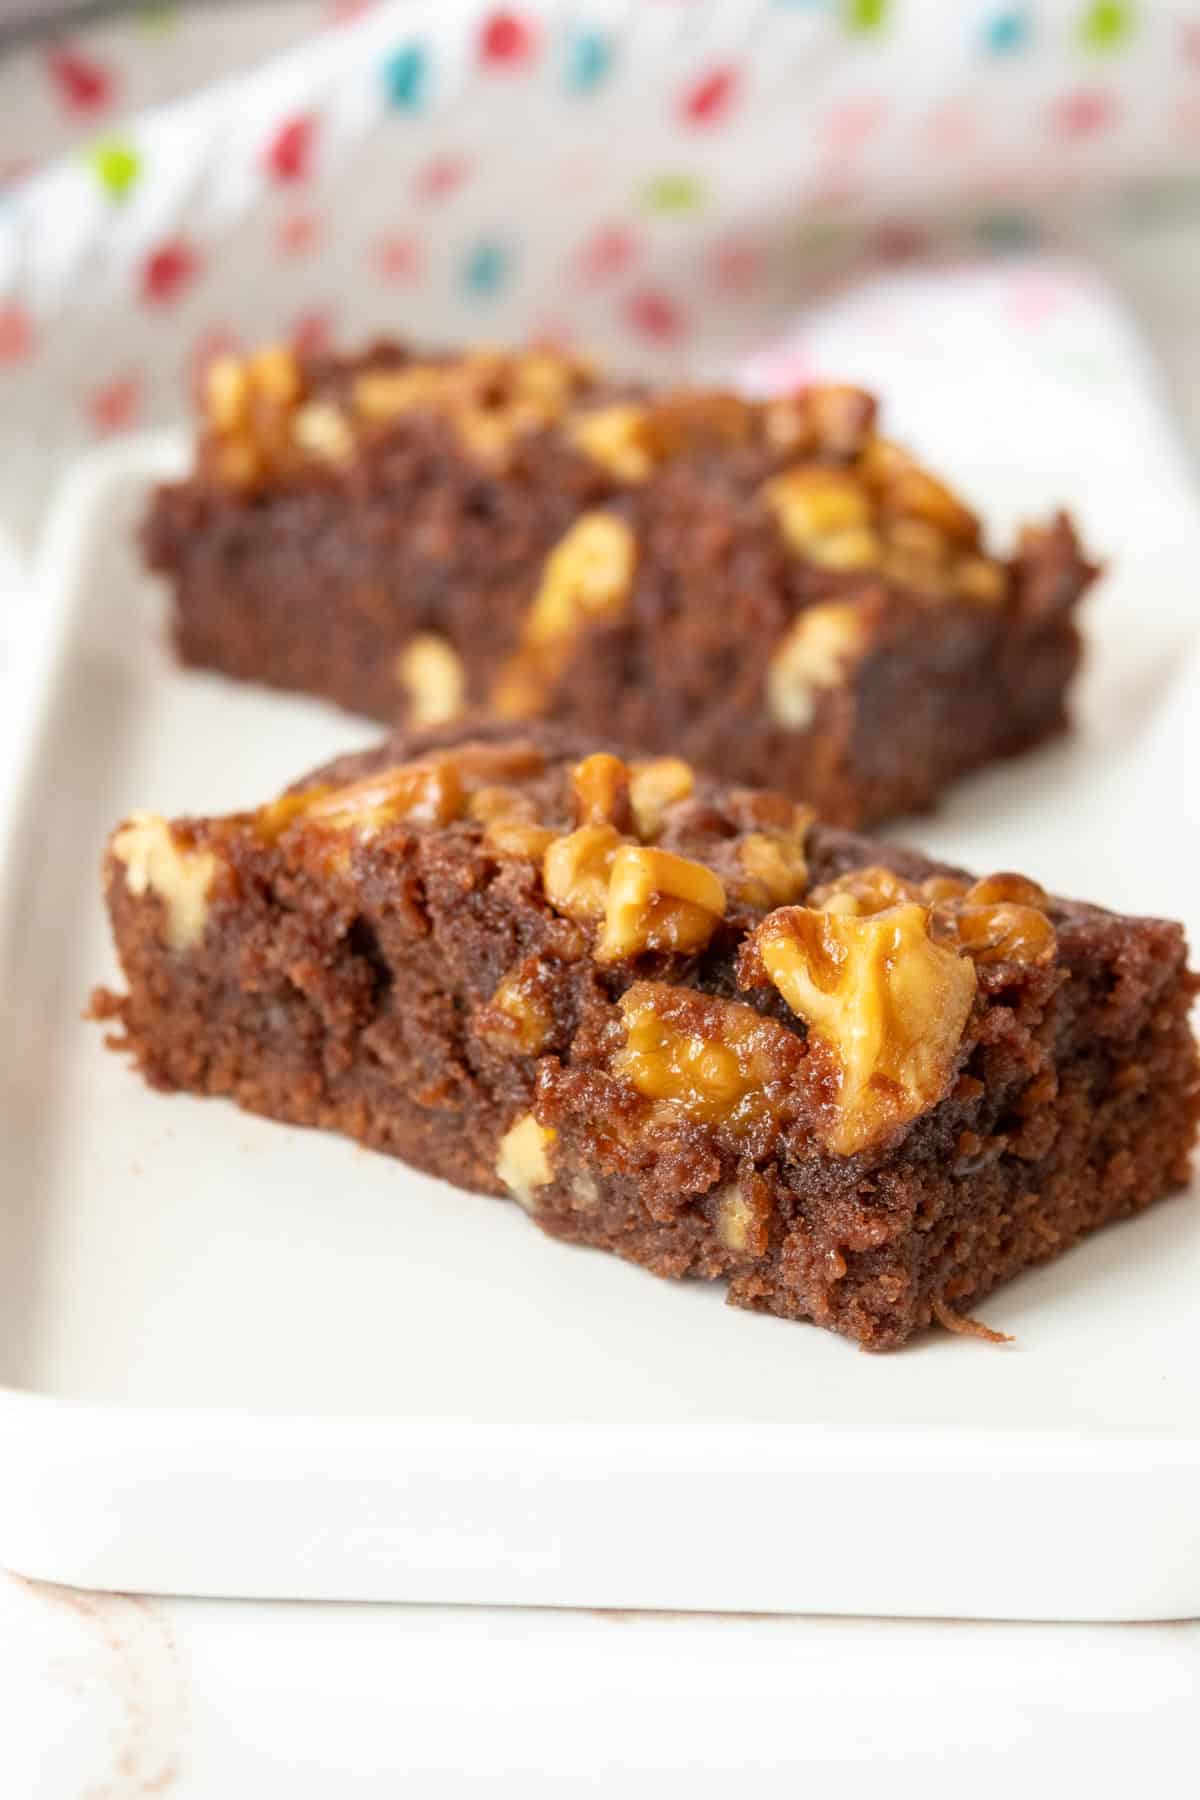 Two brownies with walnuts on a white plate.